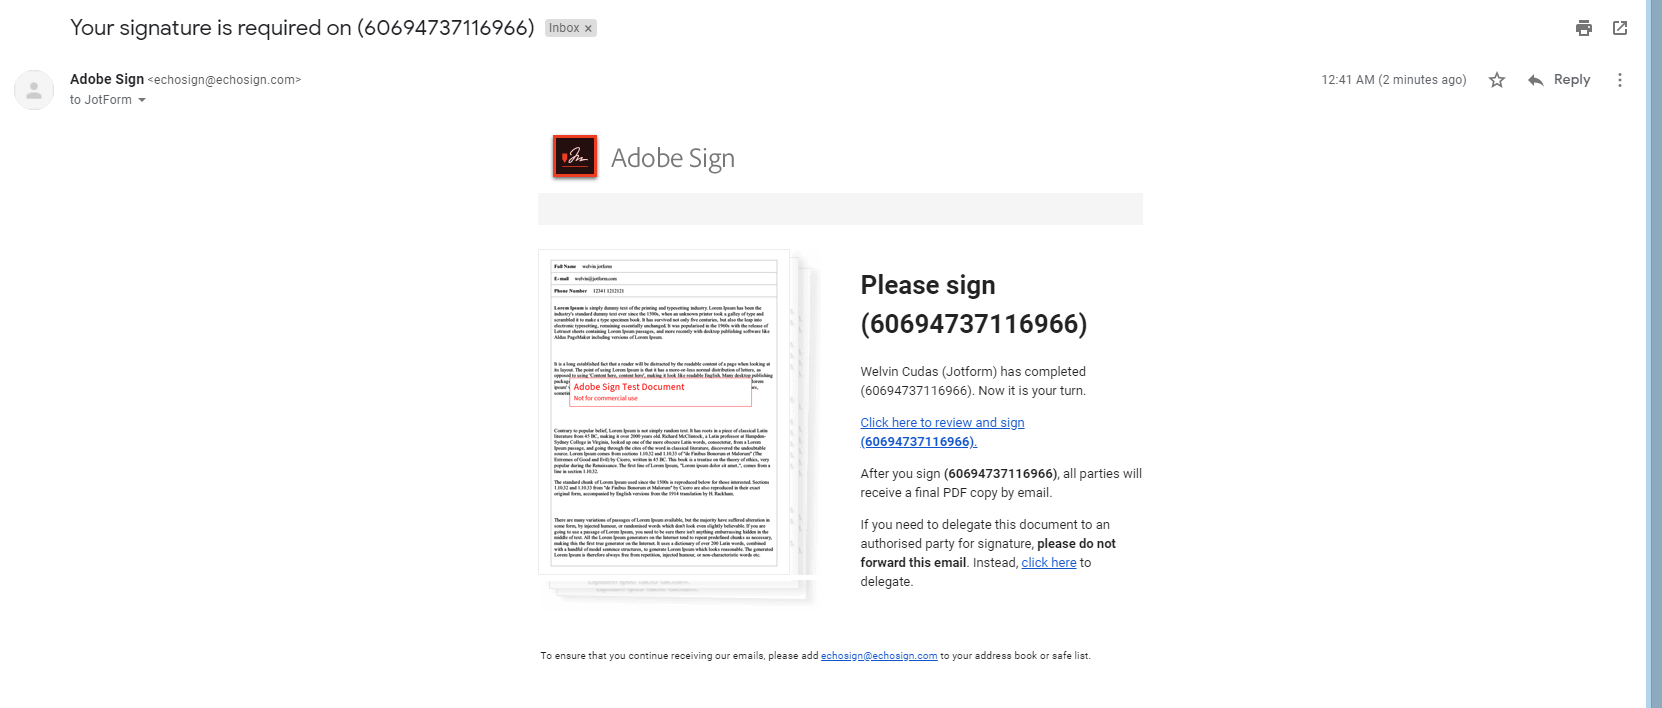 How can the form owner receive a copy of the Adobe signed document? Image 1 Screenshot 20